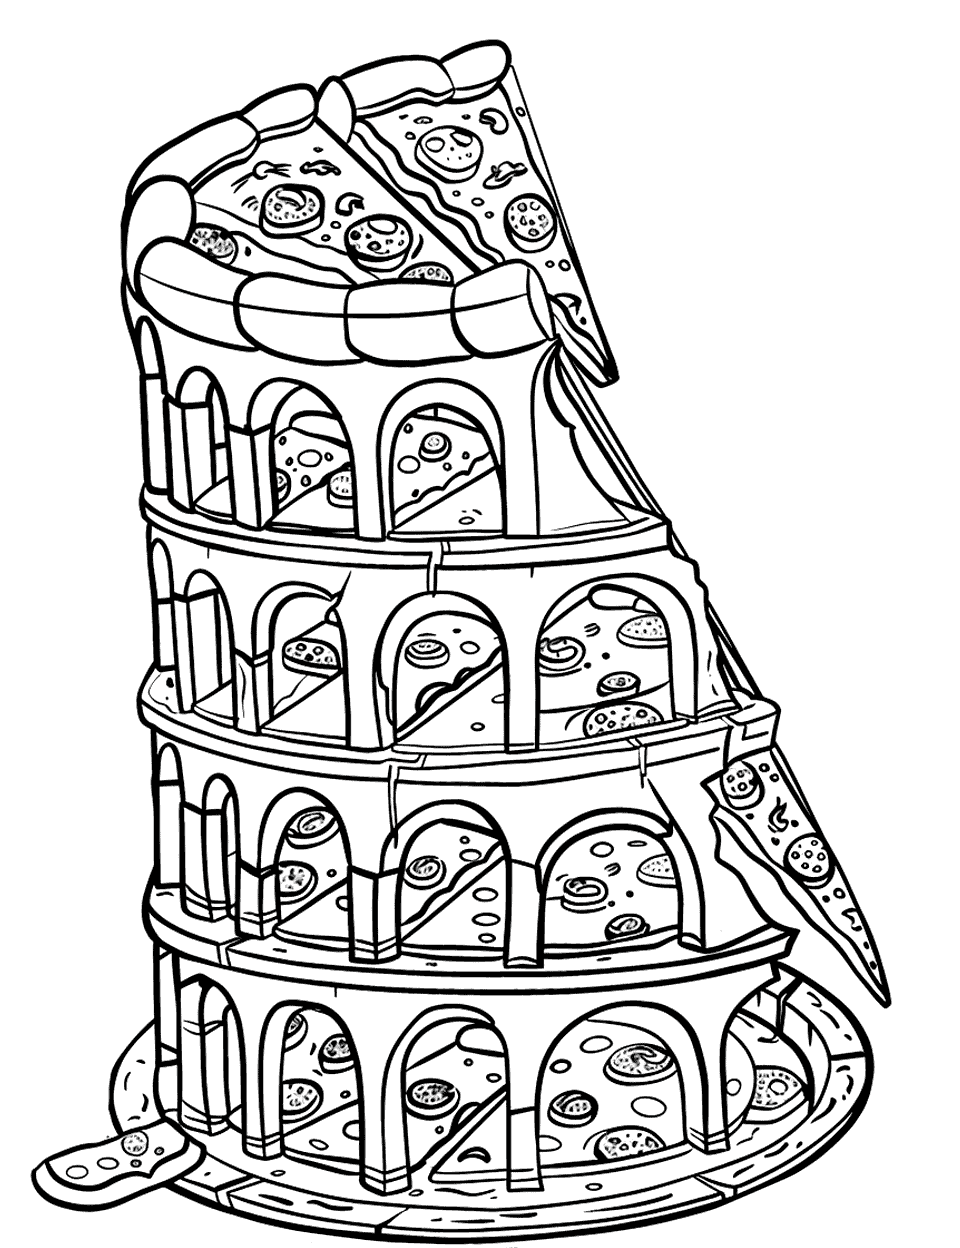 The Leaning Tower of Pizza Coloring Page - A simplified stylized Colosseum tower made of pizzas.